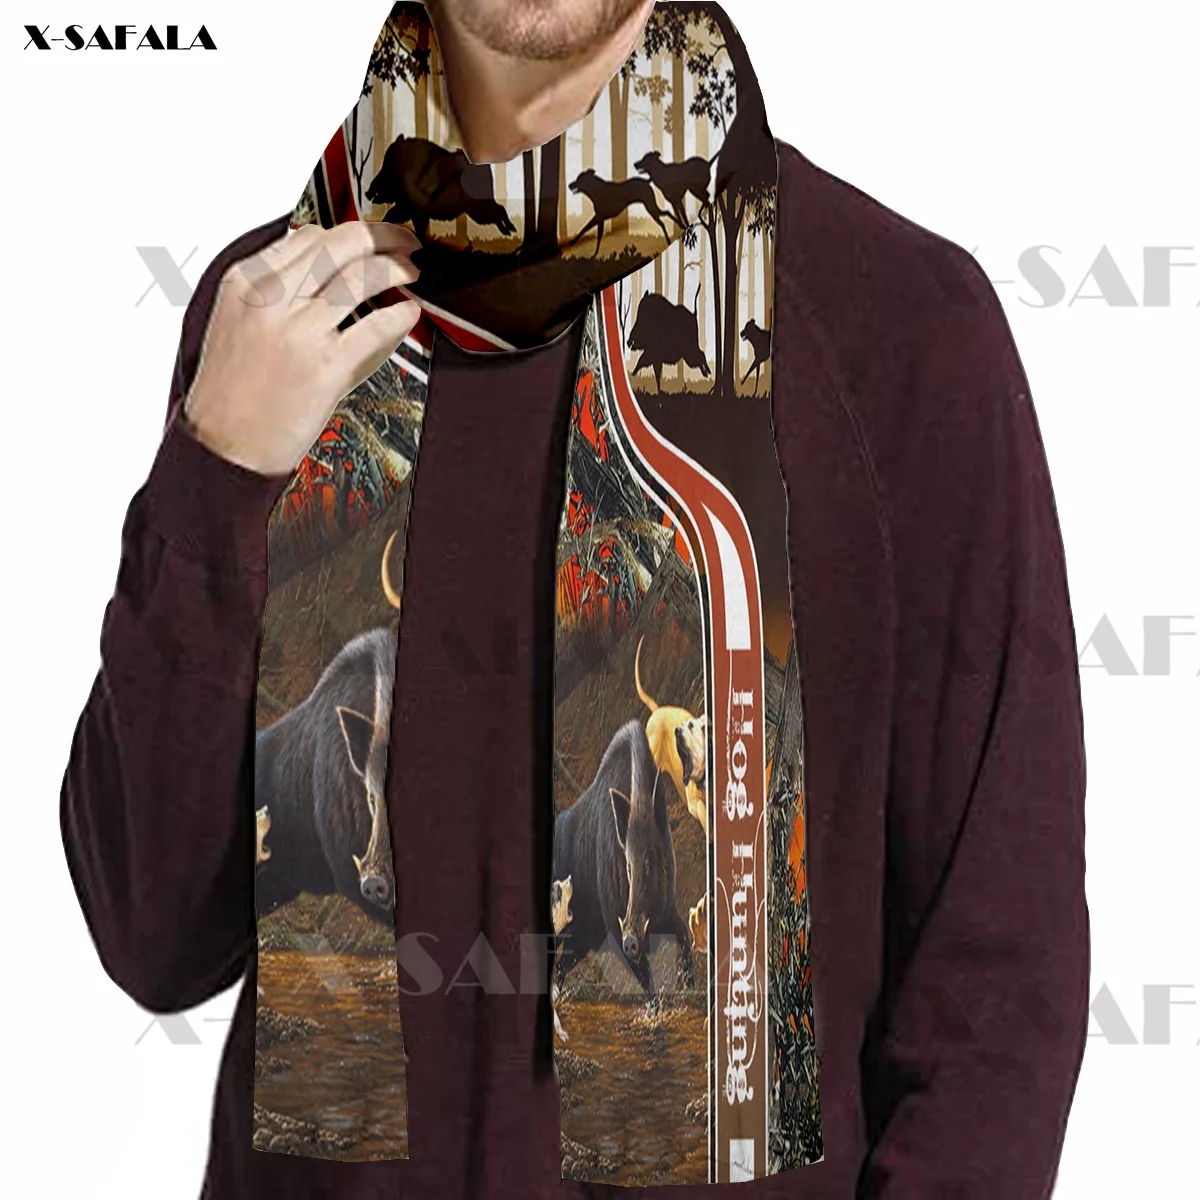 Wildboar Hunting Lover Accessories Long Scarves Shawl Soft Fleece Men's Gift For Hoodie mens infinity scarf